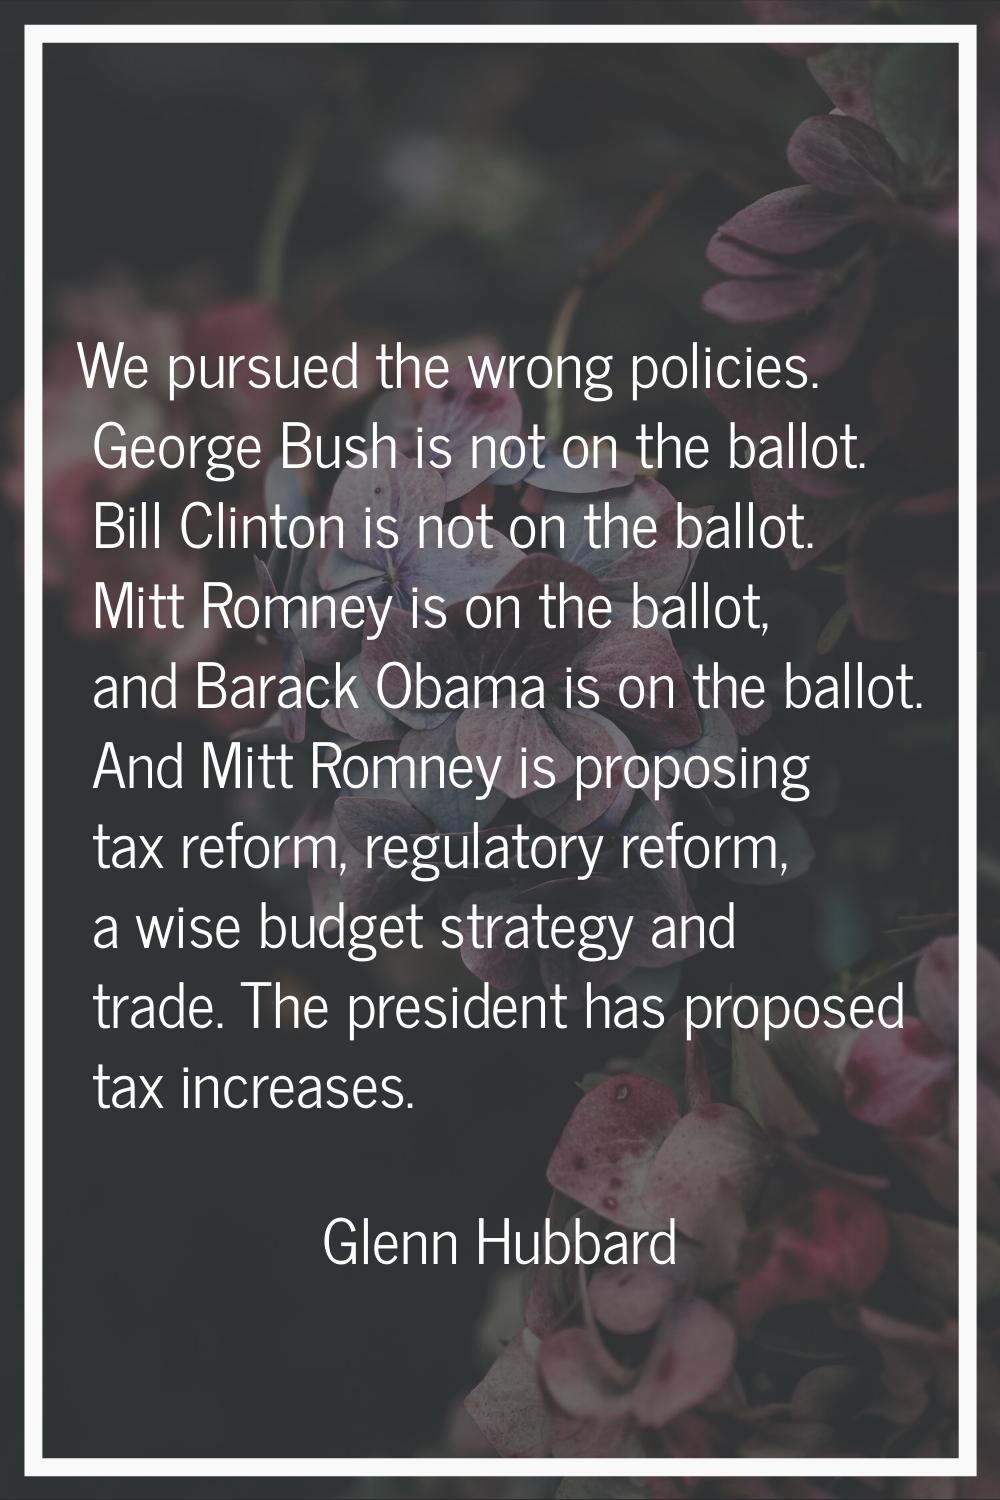 We pursued the wrong policies. George Bush is not on the ballot. Bill Clinton is not on the ballot.